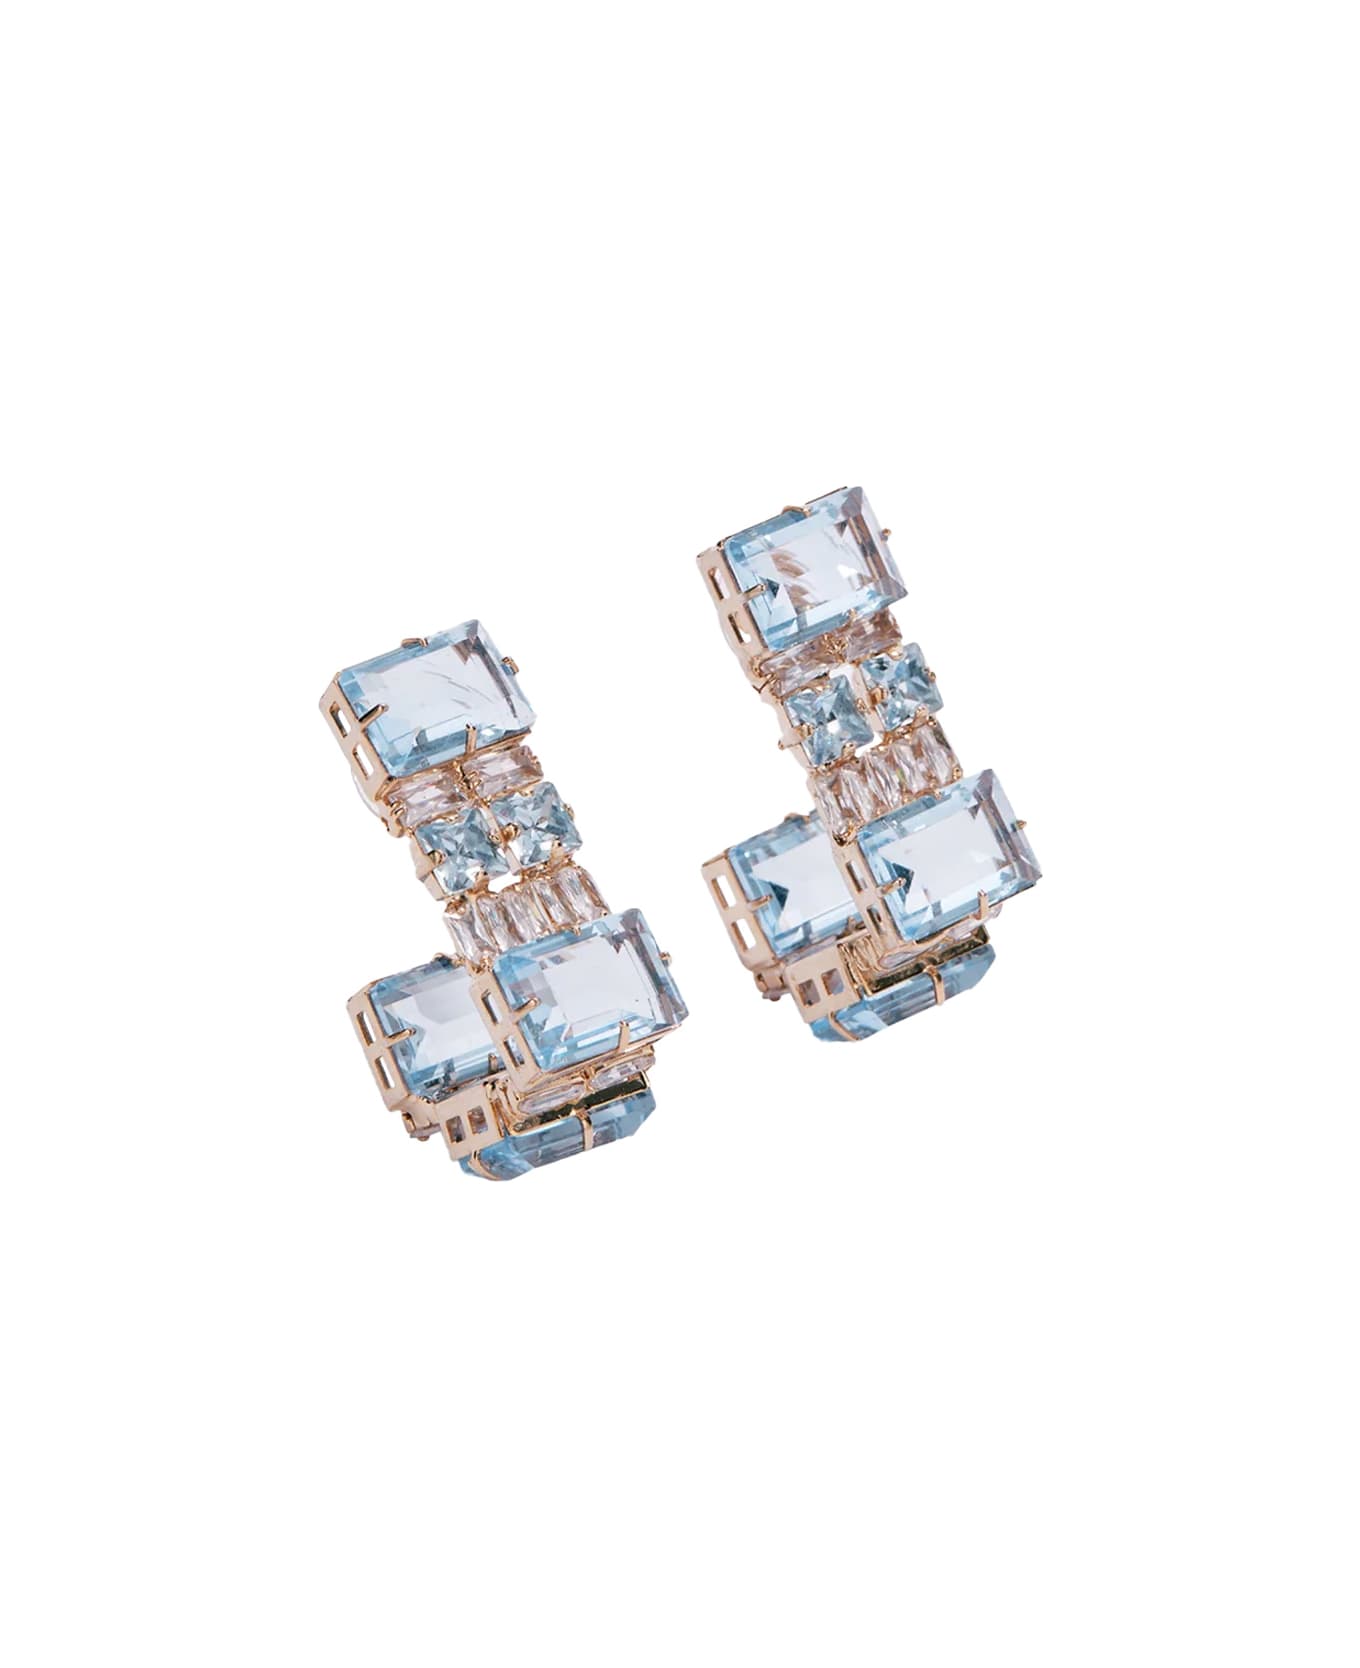 Ermanno Scervino Earrings With Light Blue Stones - Blue